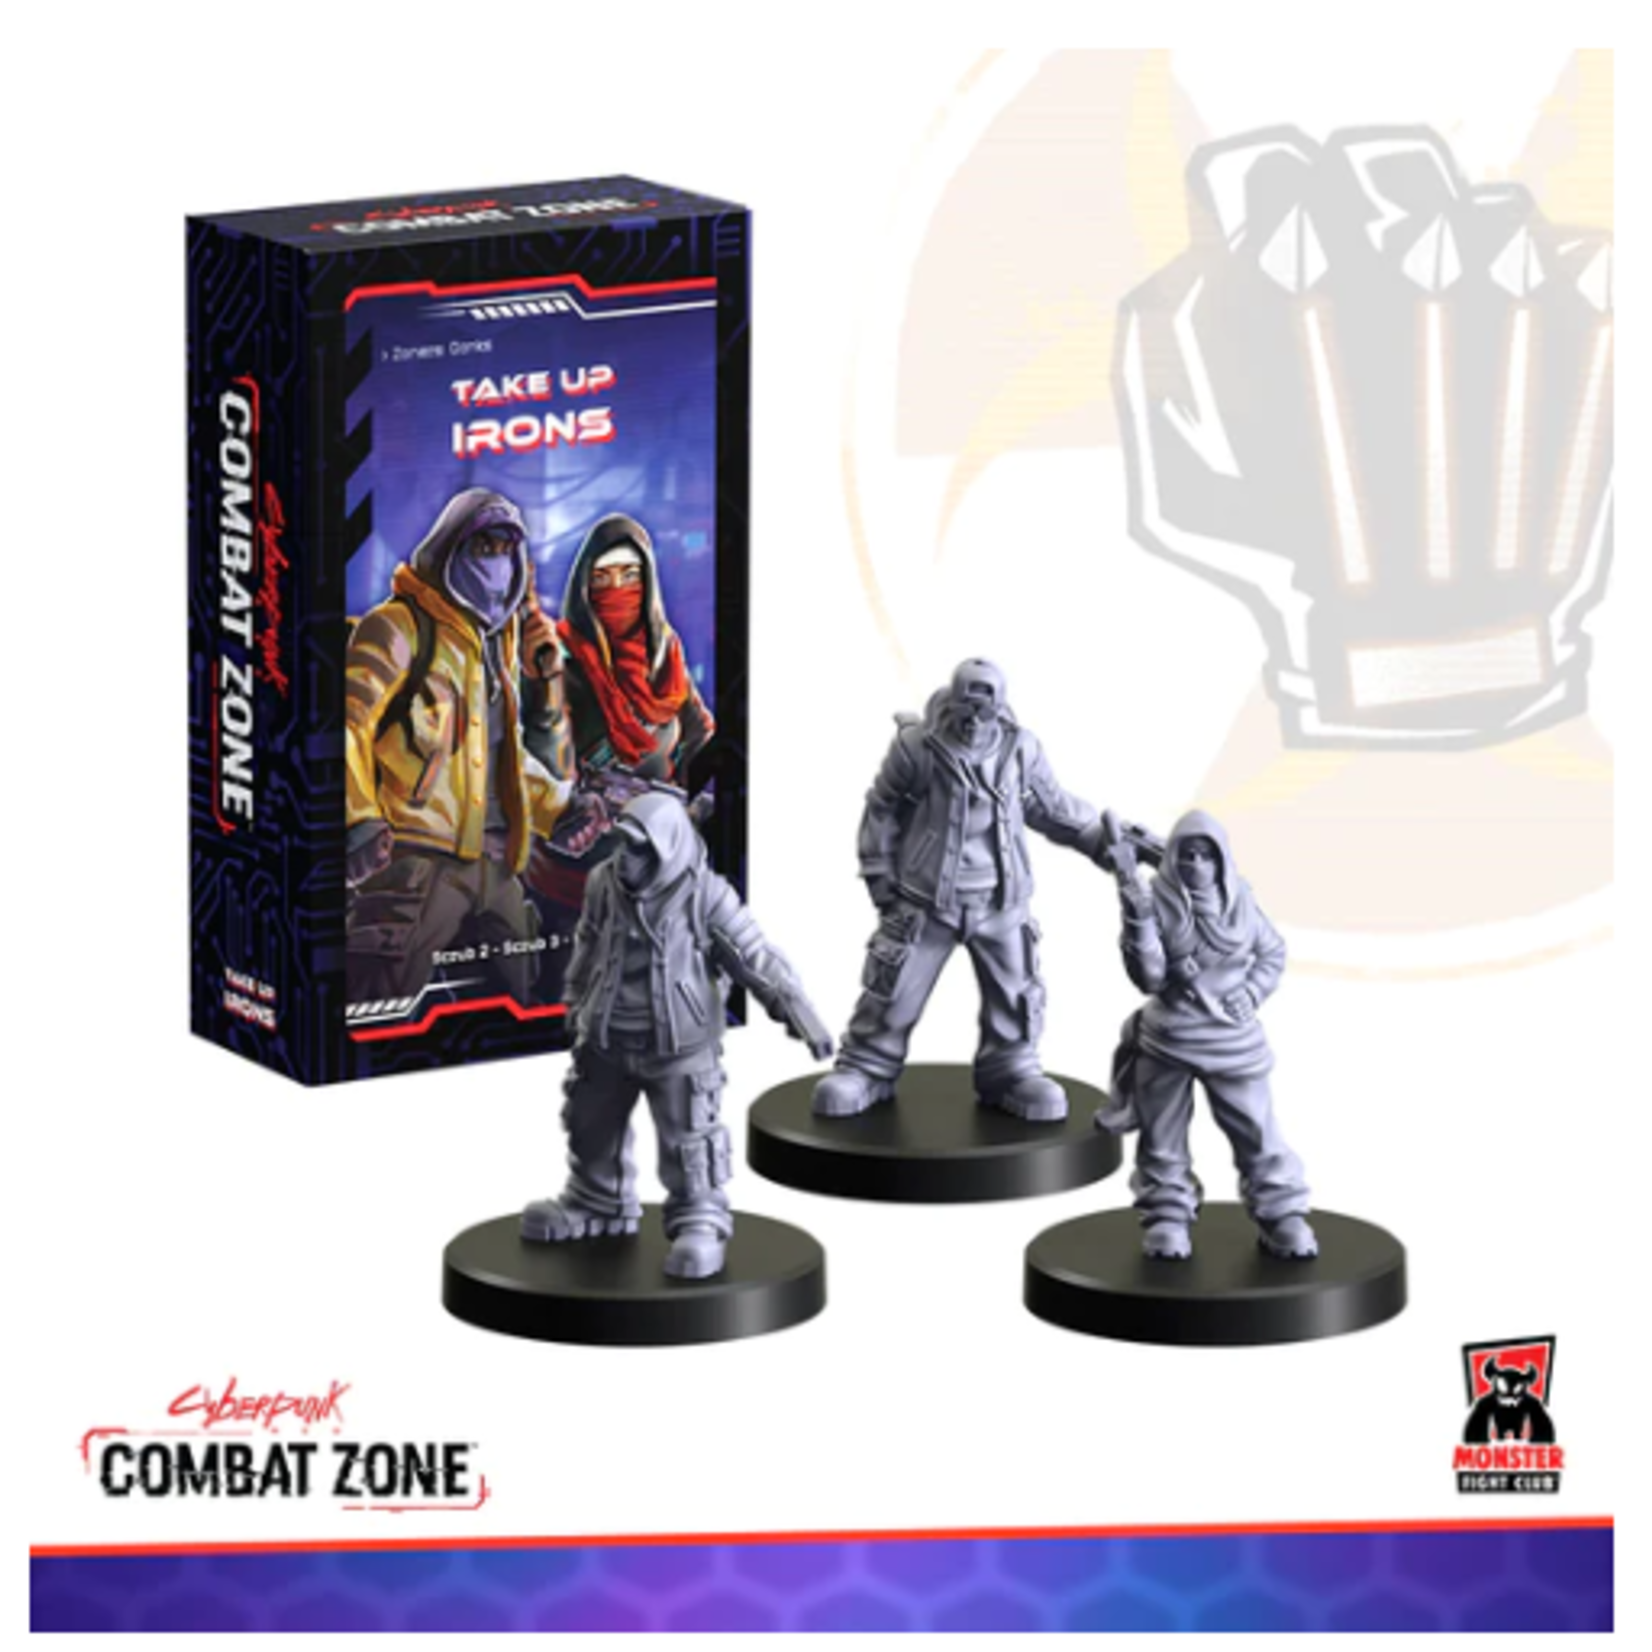 Monster Fight Club Cyberpunk Red: Combat Zone: Take Up Irons